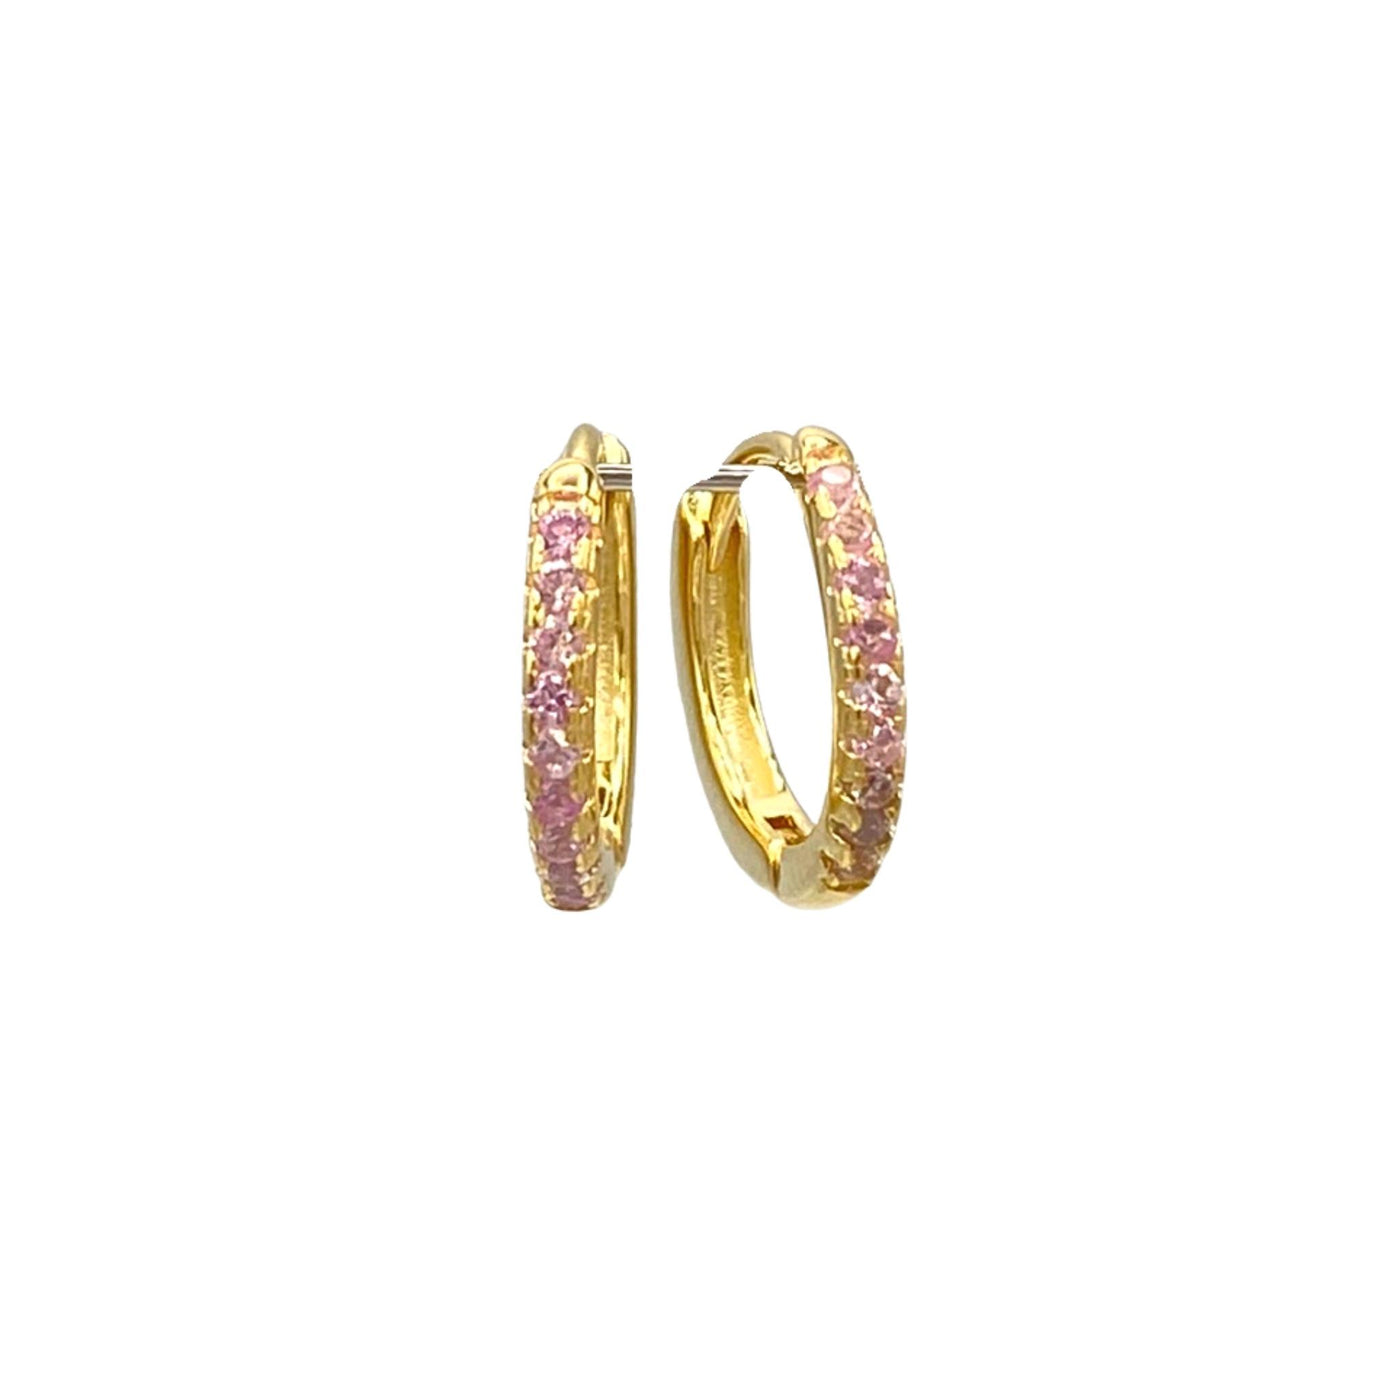 Silver hoop earrings with stones - yellow -13 mm